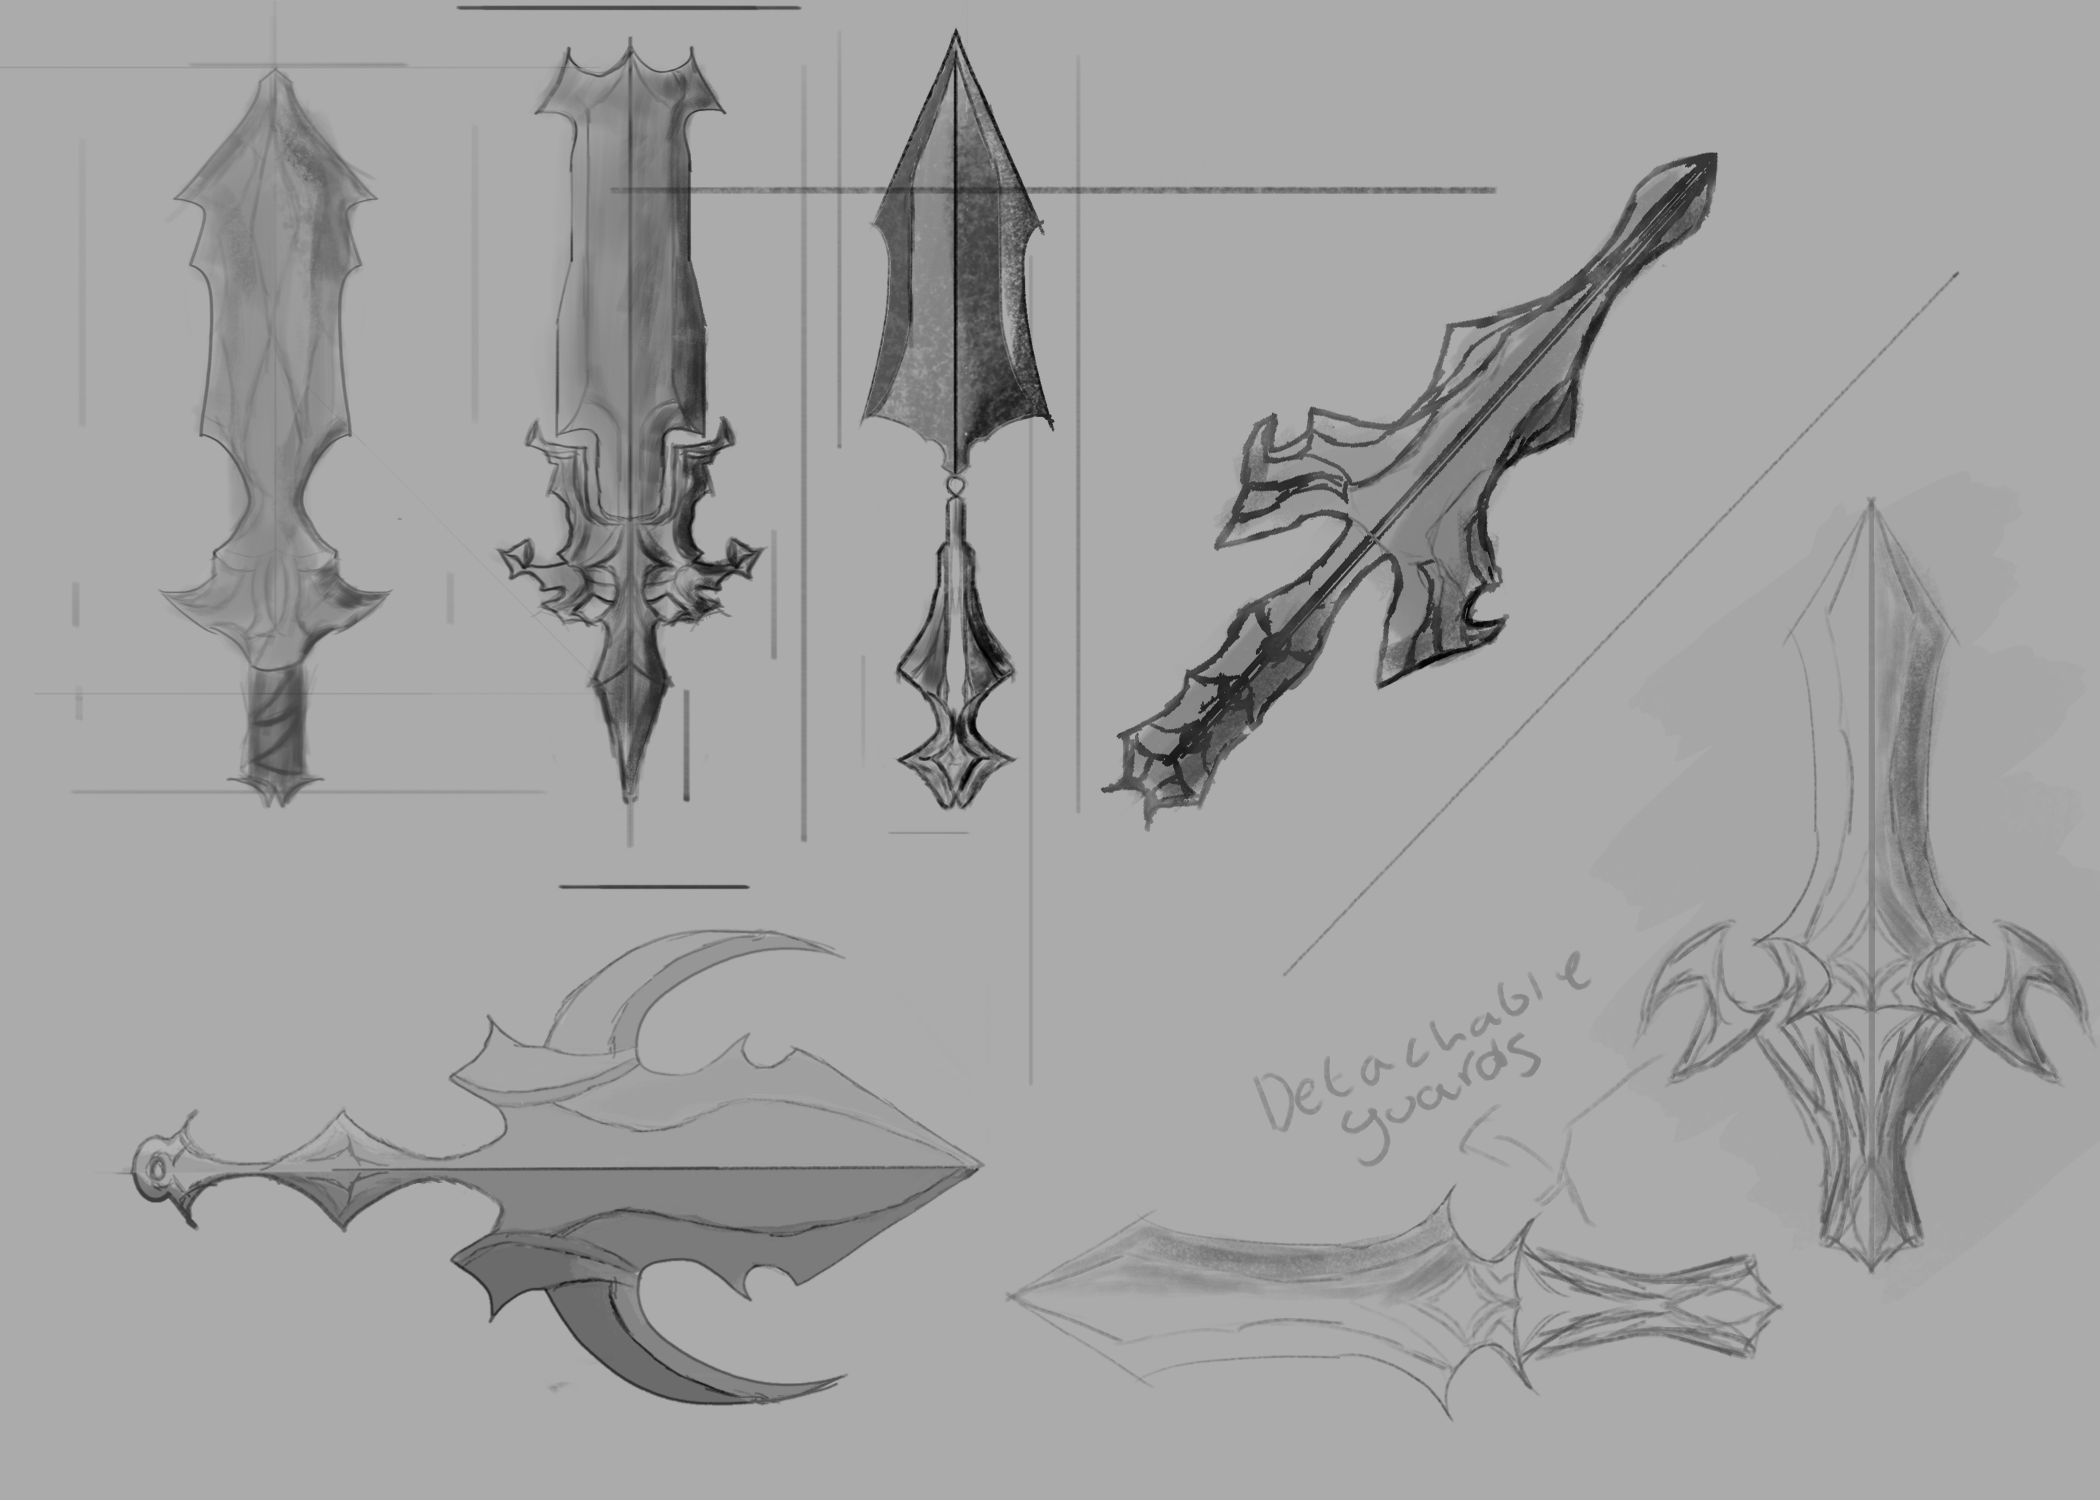 Throwing Knife sketches